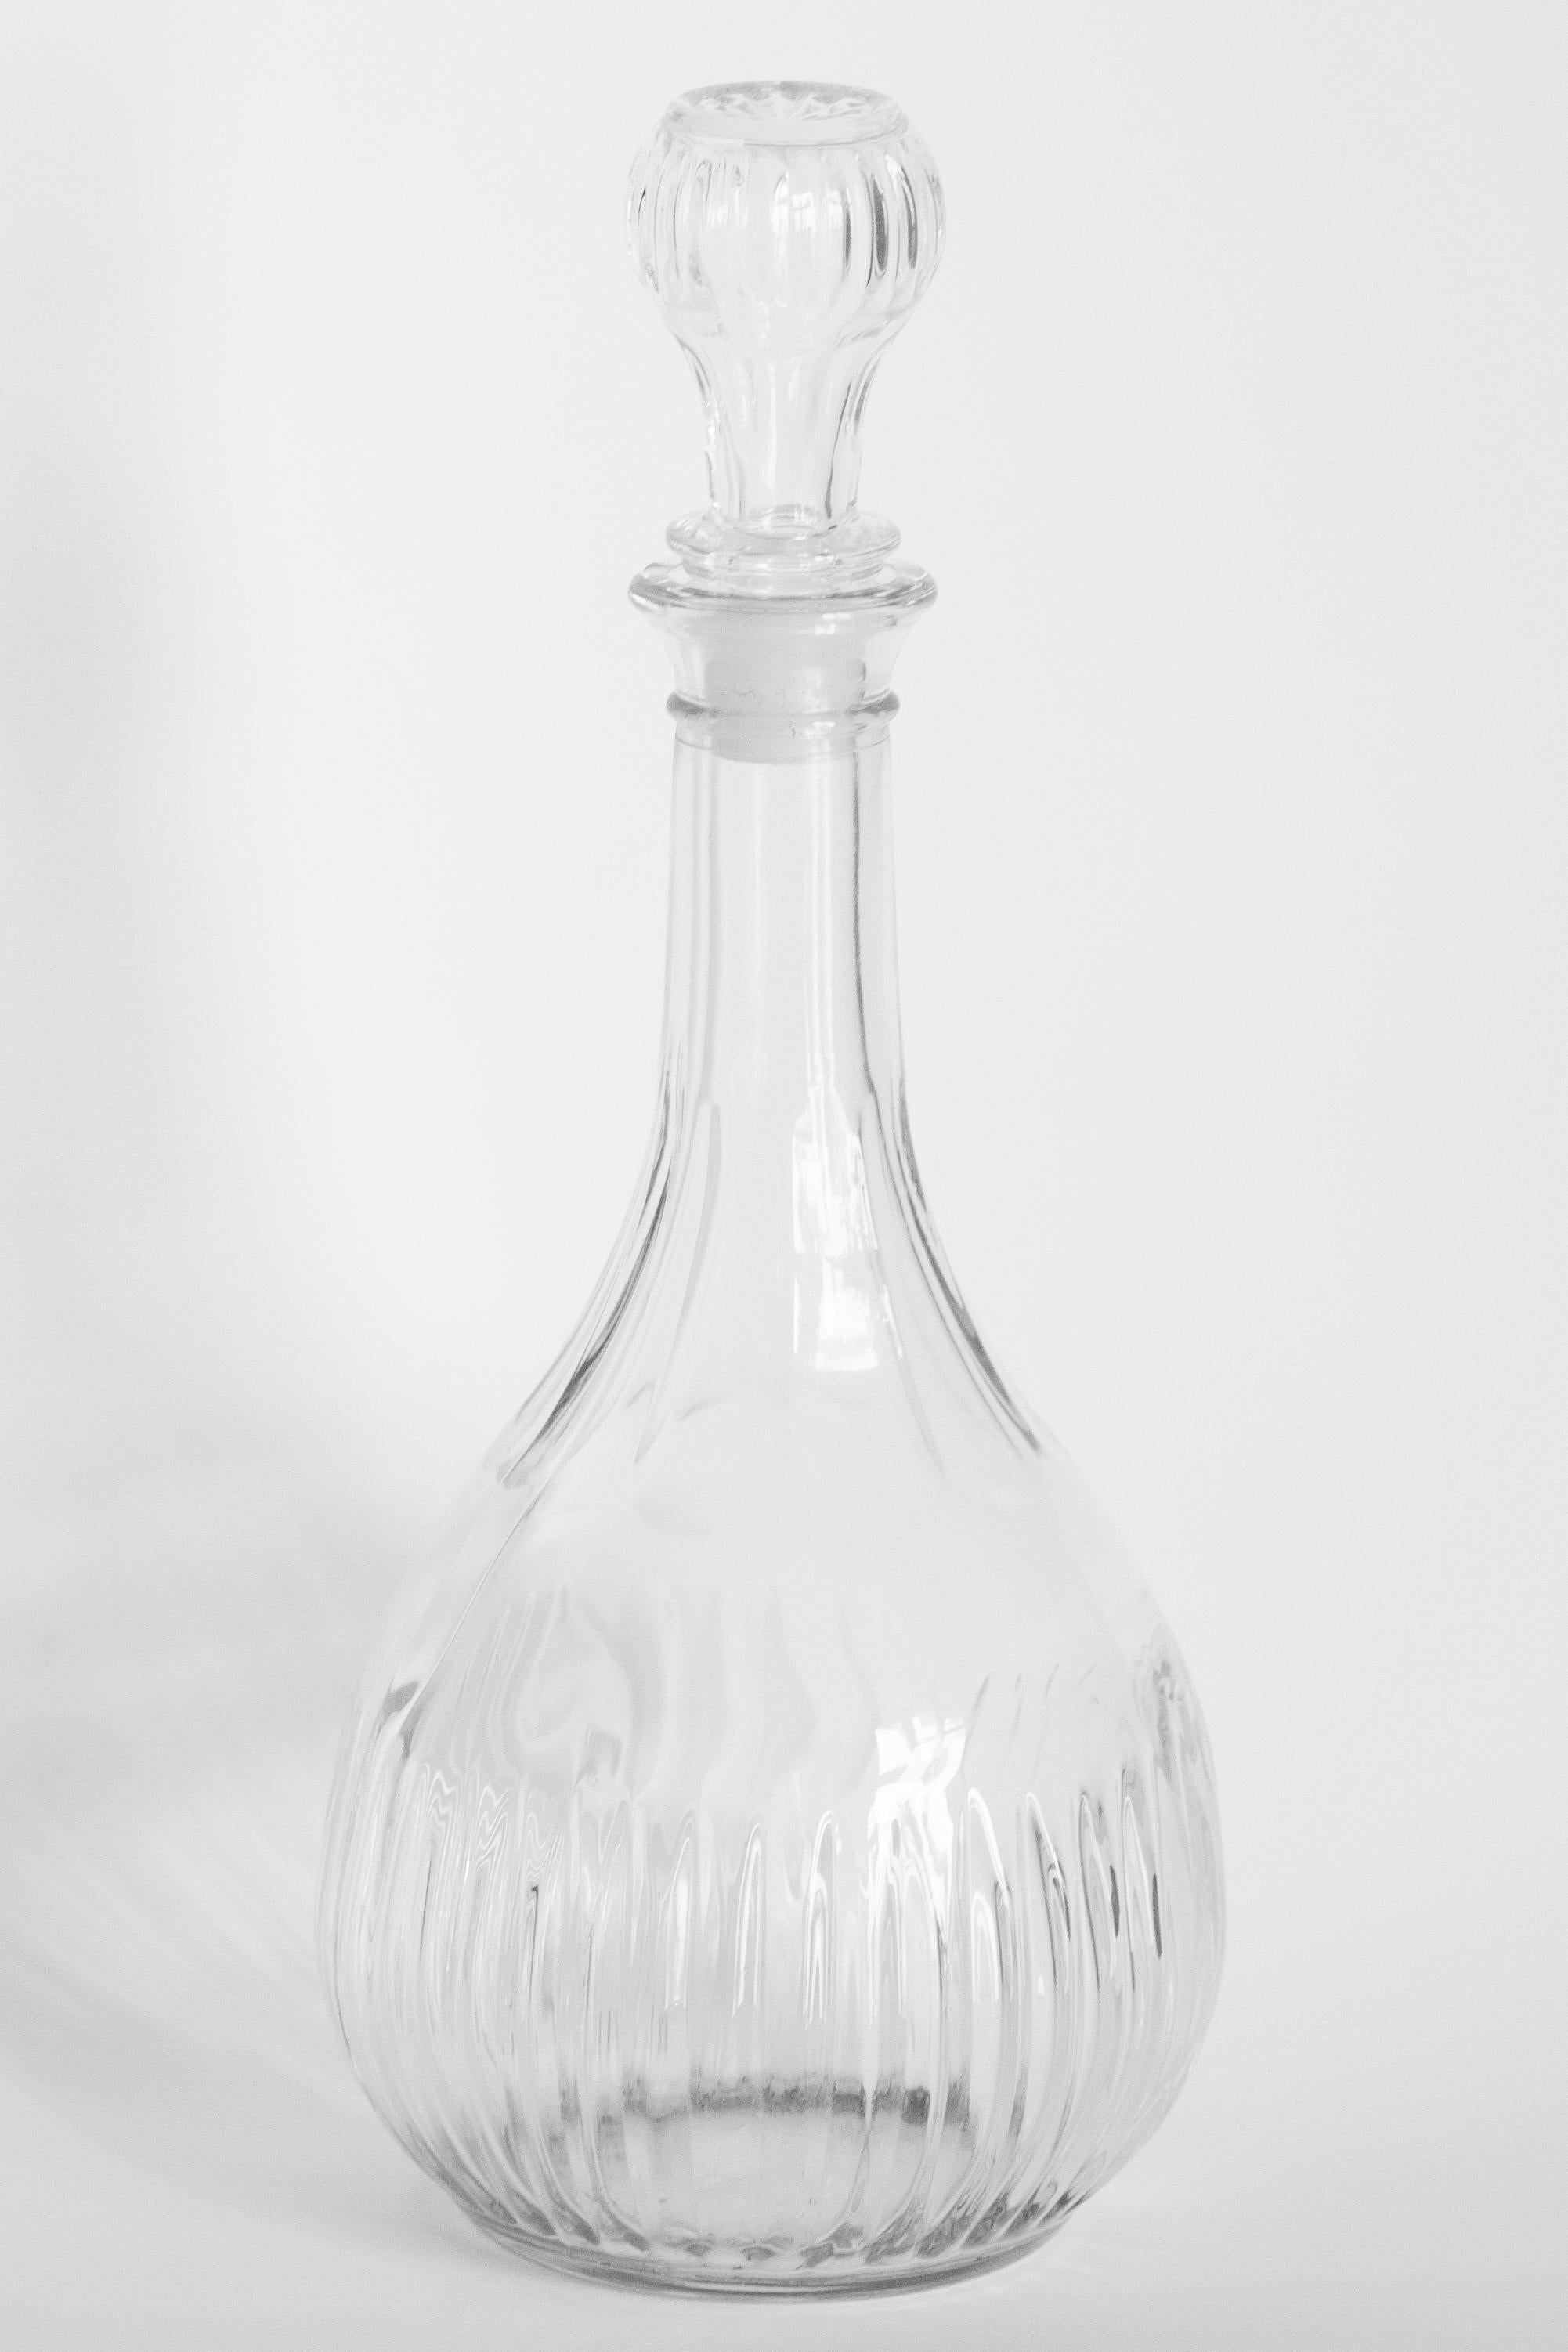 A stunning crystal transparent decanter with geometric design, made by one of the many glass manufacturers based in the region of Empoli, Italy. Would make a great addition to any collection! Very good original vintage condition. Only one unique